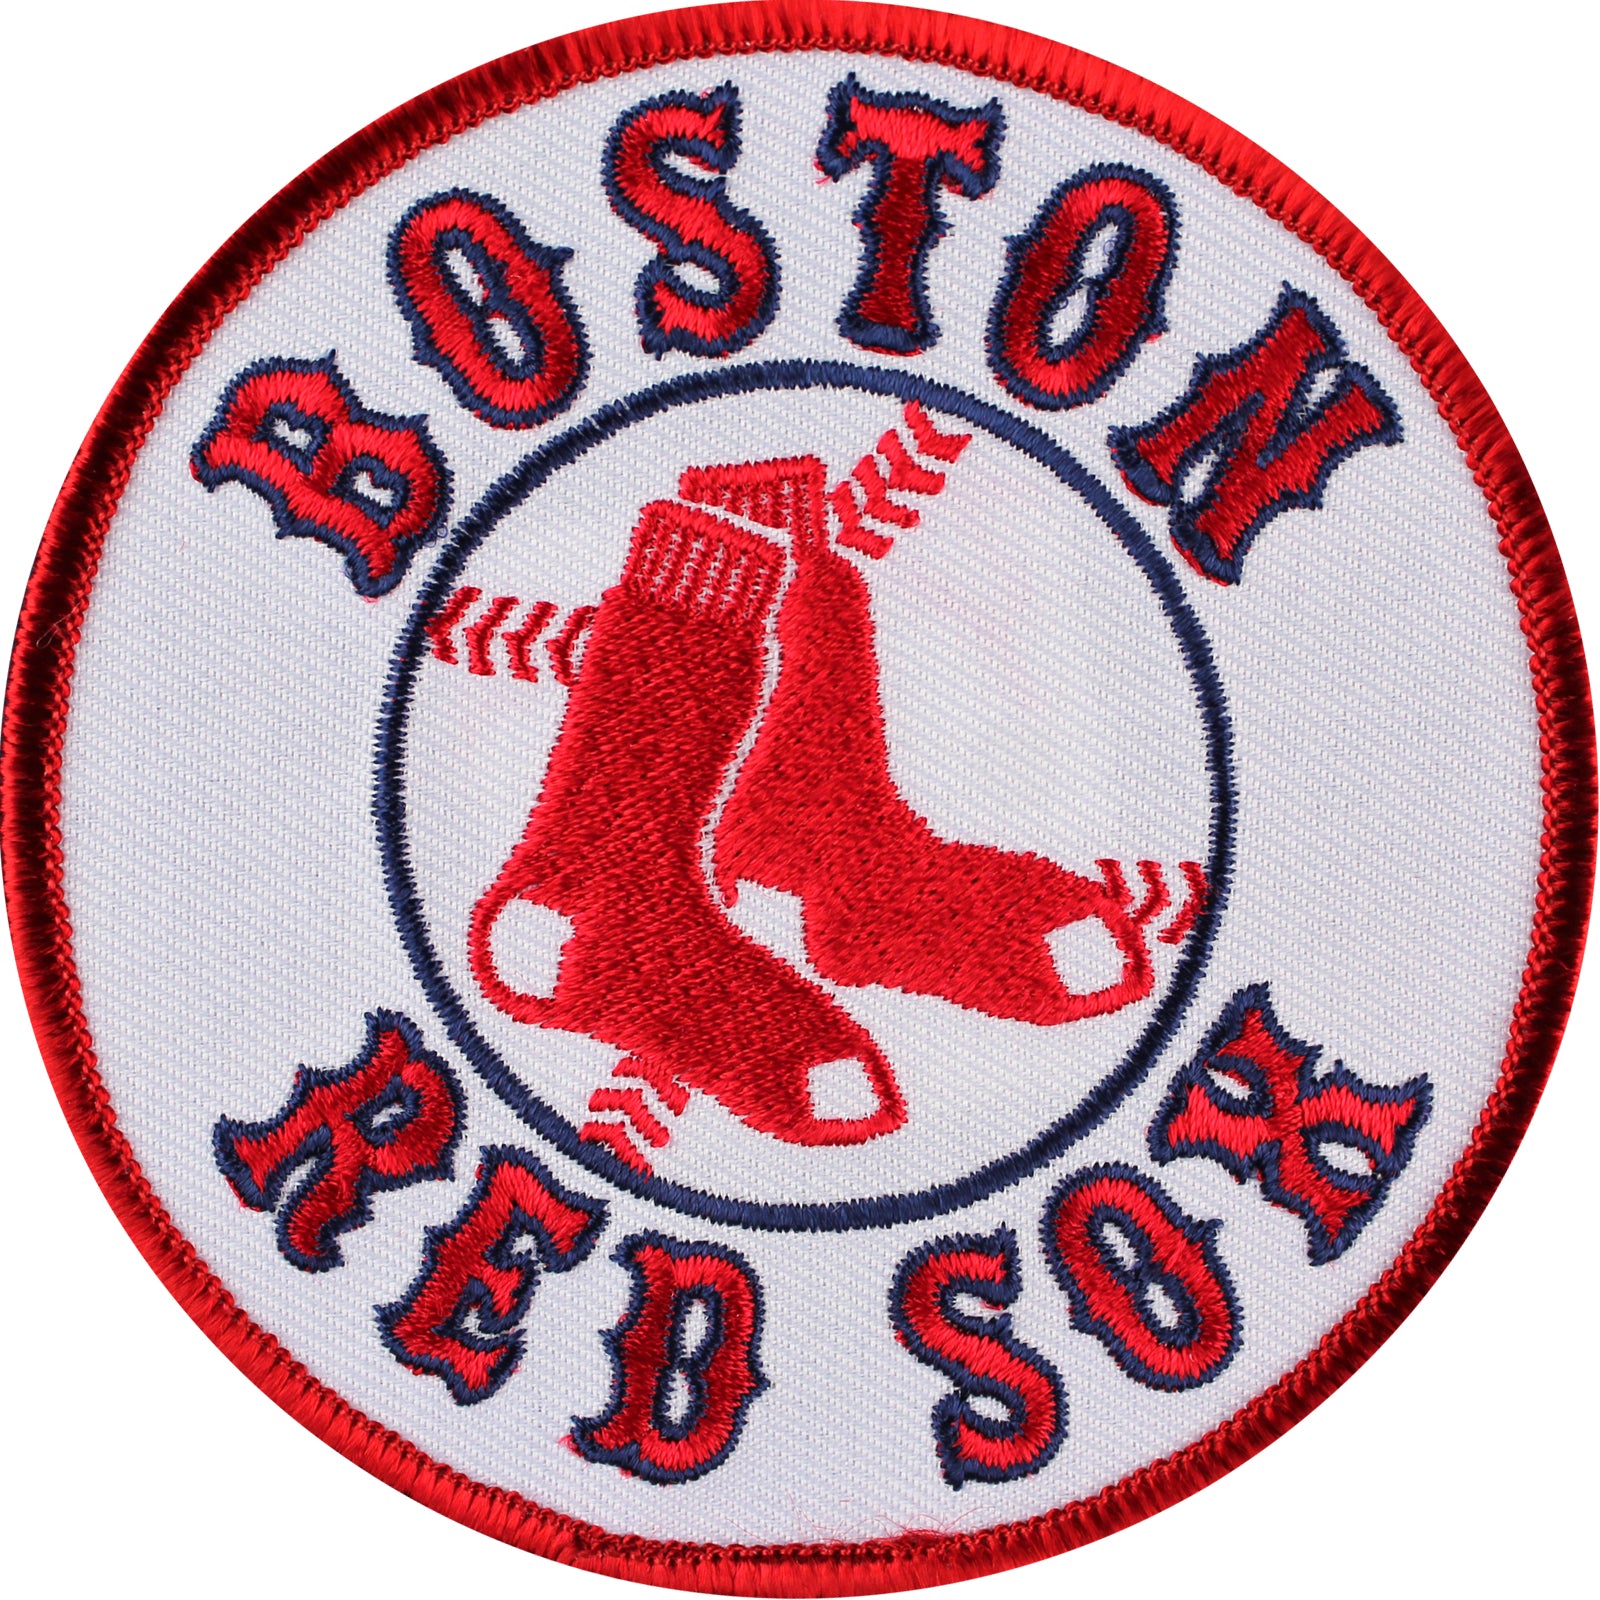 Check Out New Photos Of Red Sox Partnership Jersey Patch